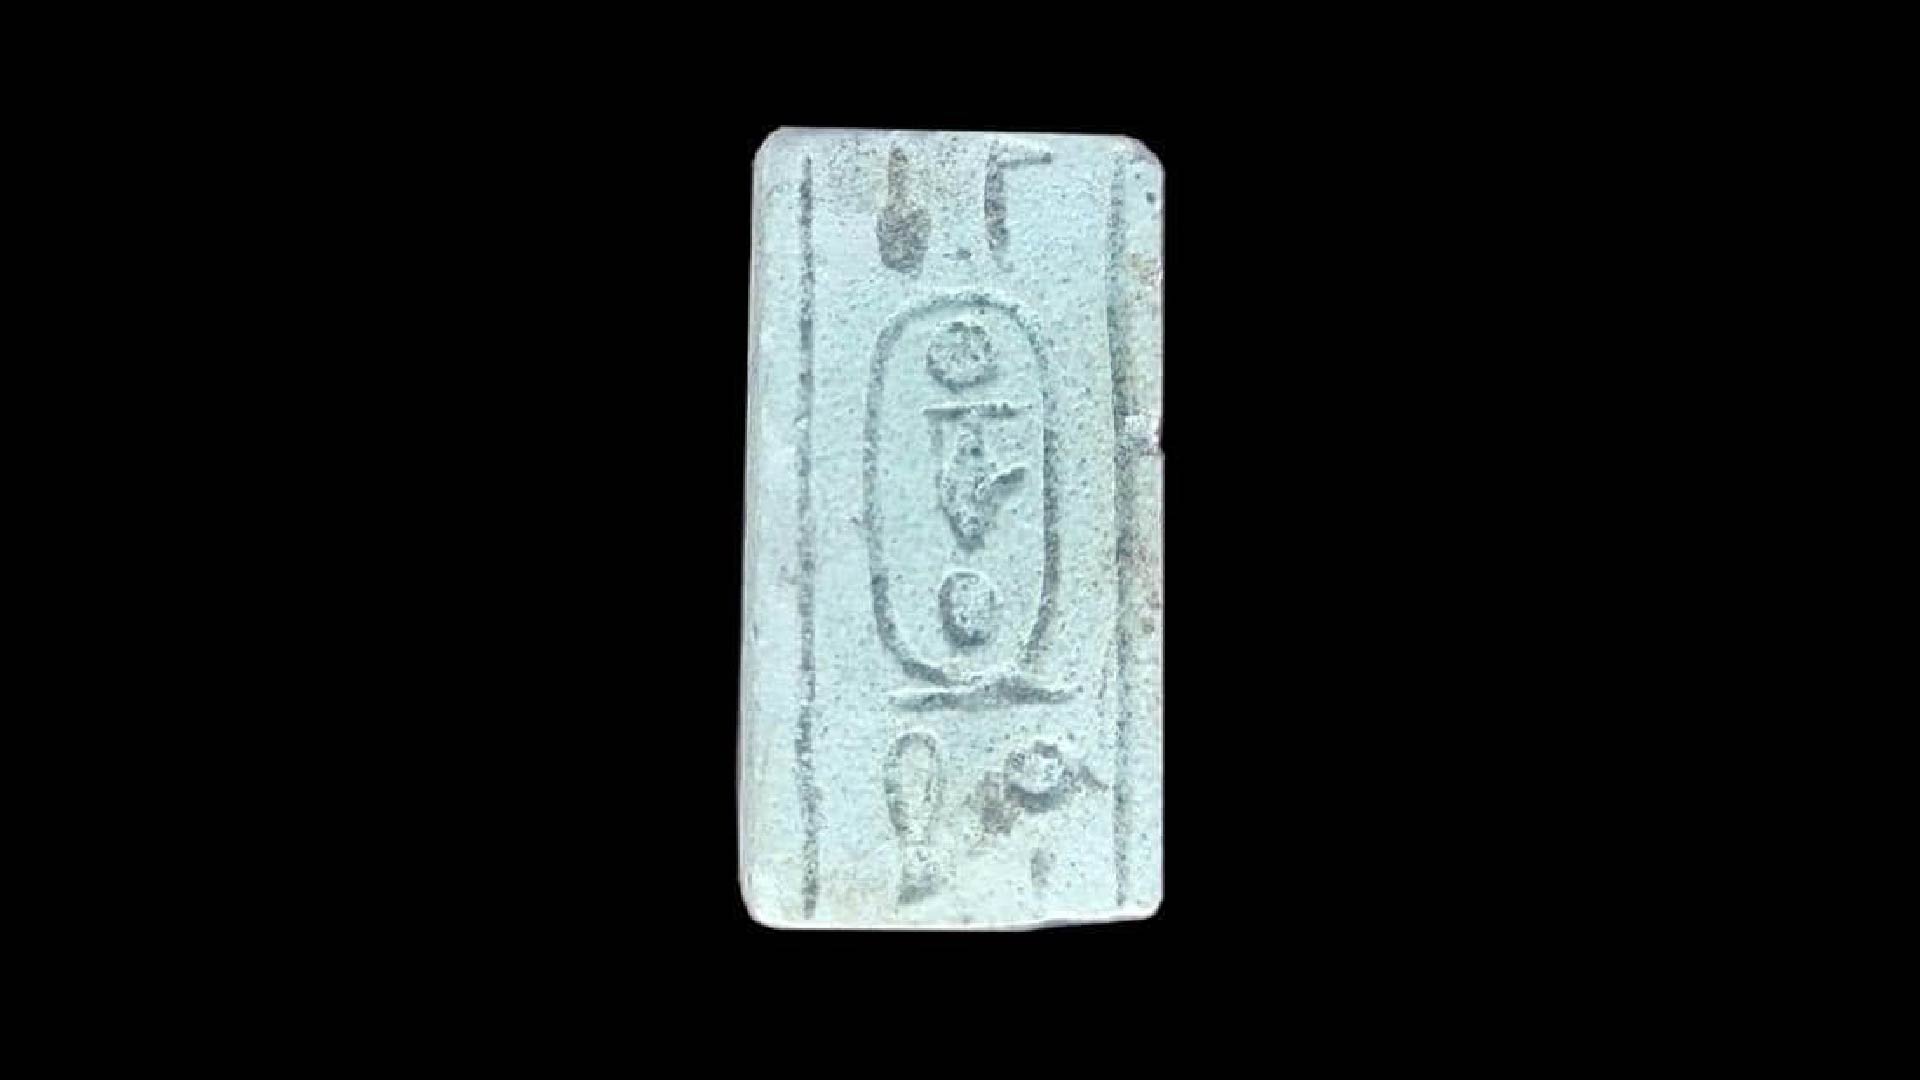 A photograph of a cartouche found in the rest house. It is made of light gray stone and has markings on it.